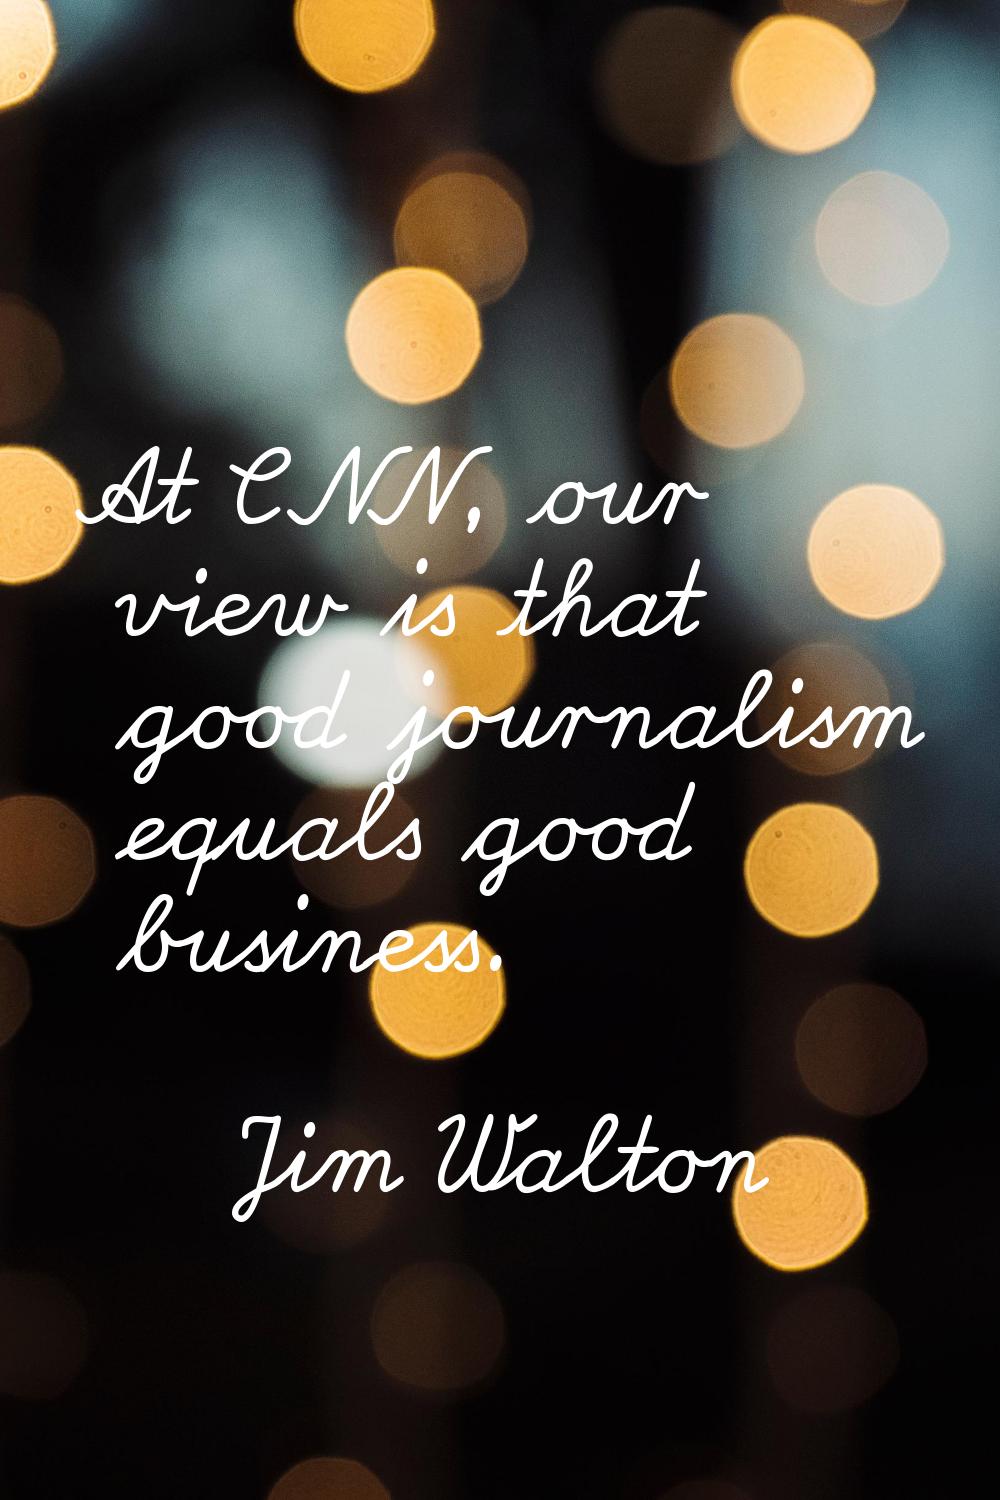 At CNN, our view is that good journalism equals good business.